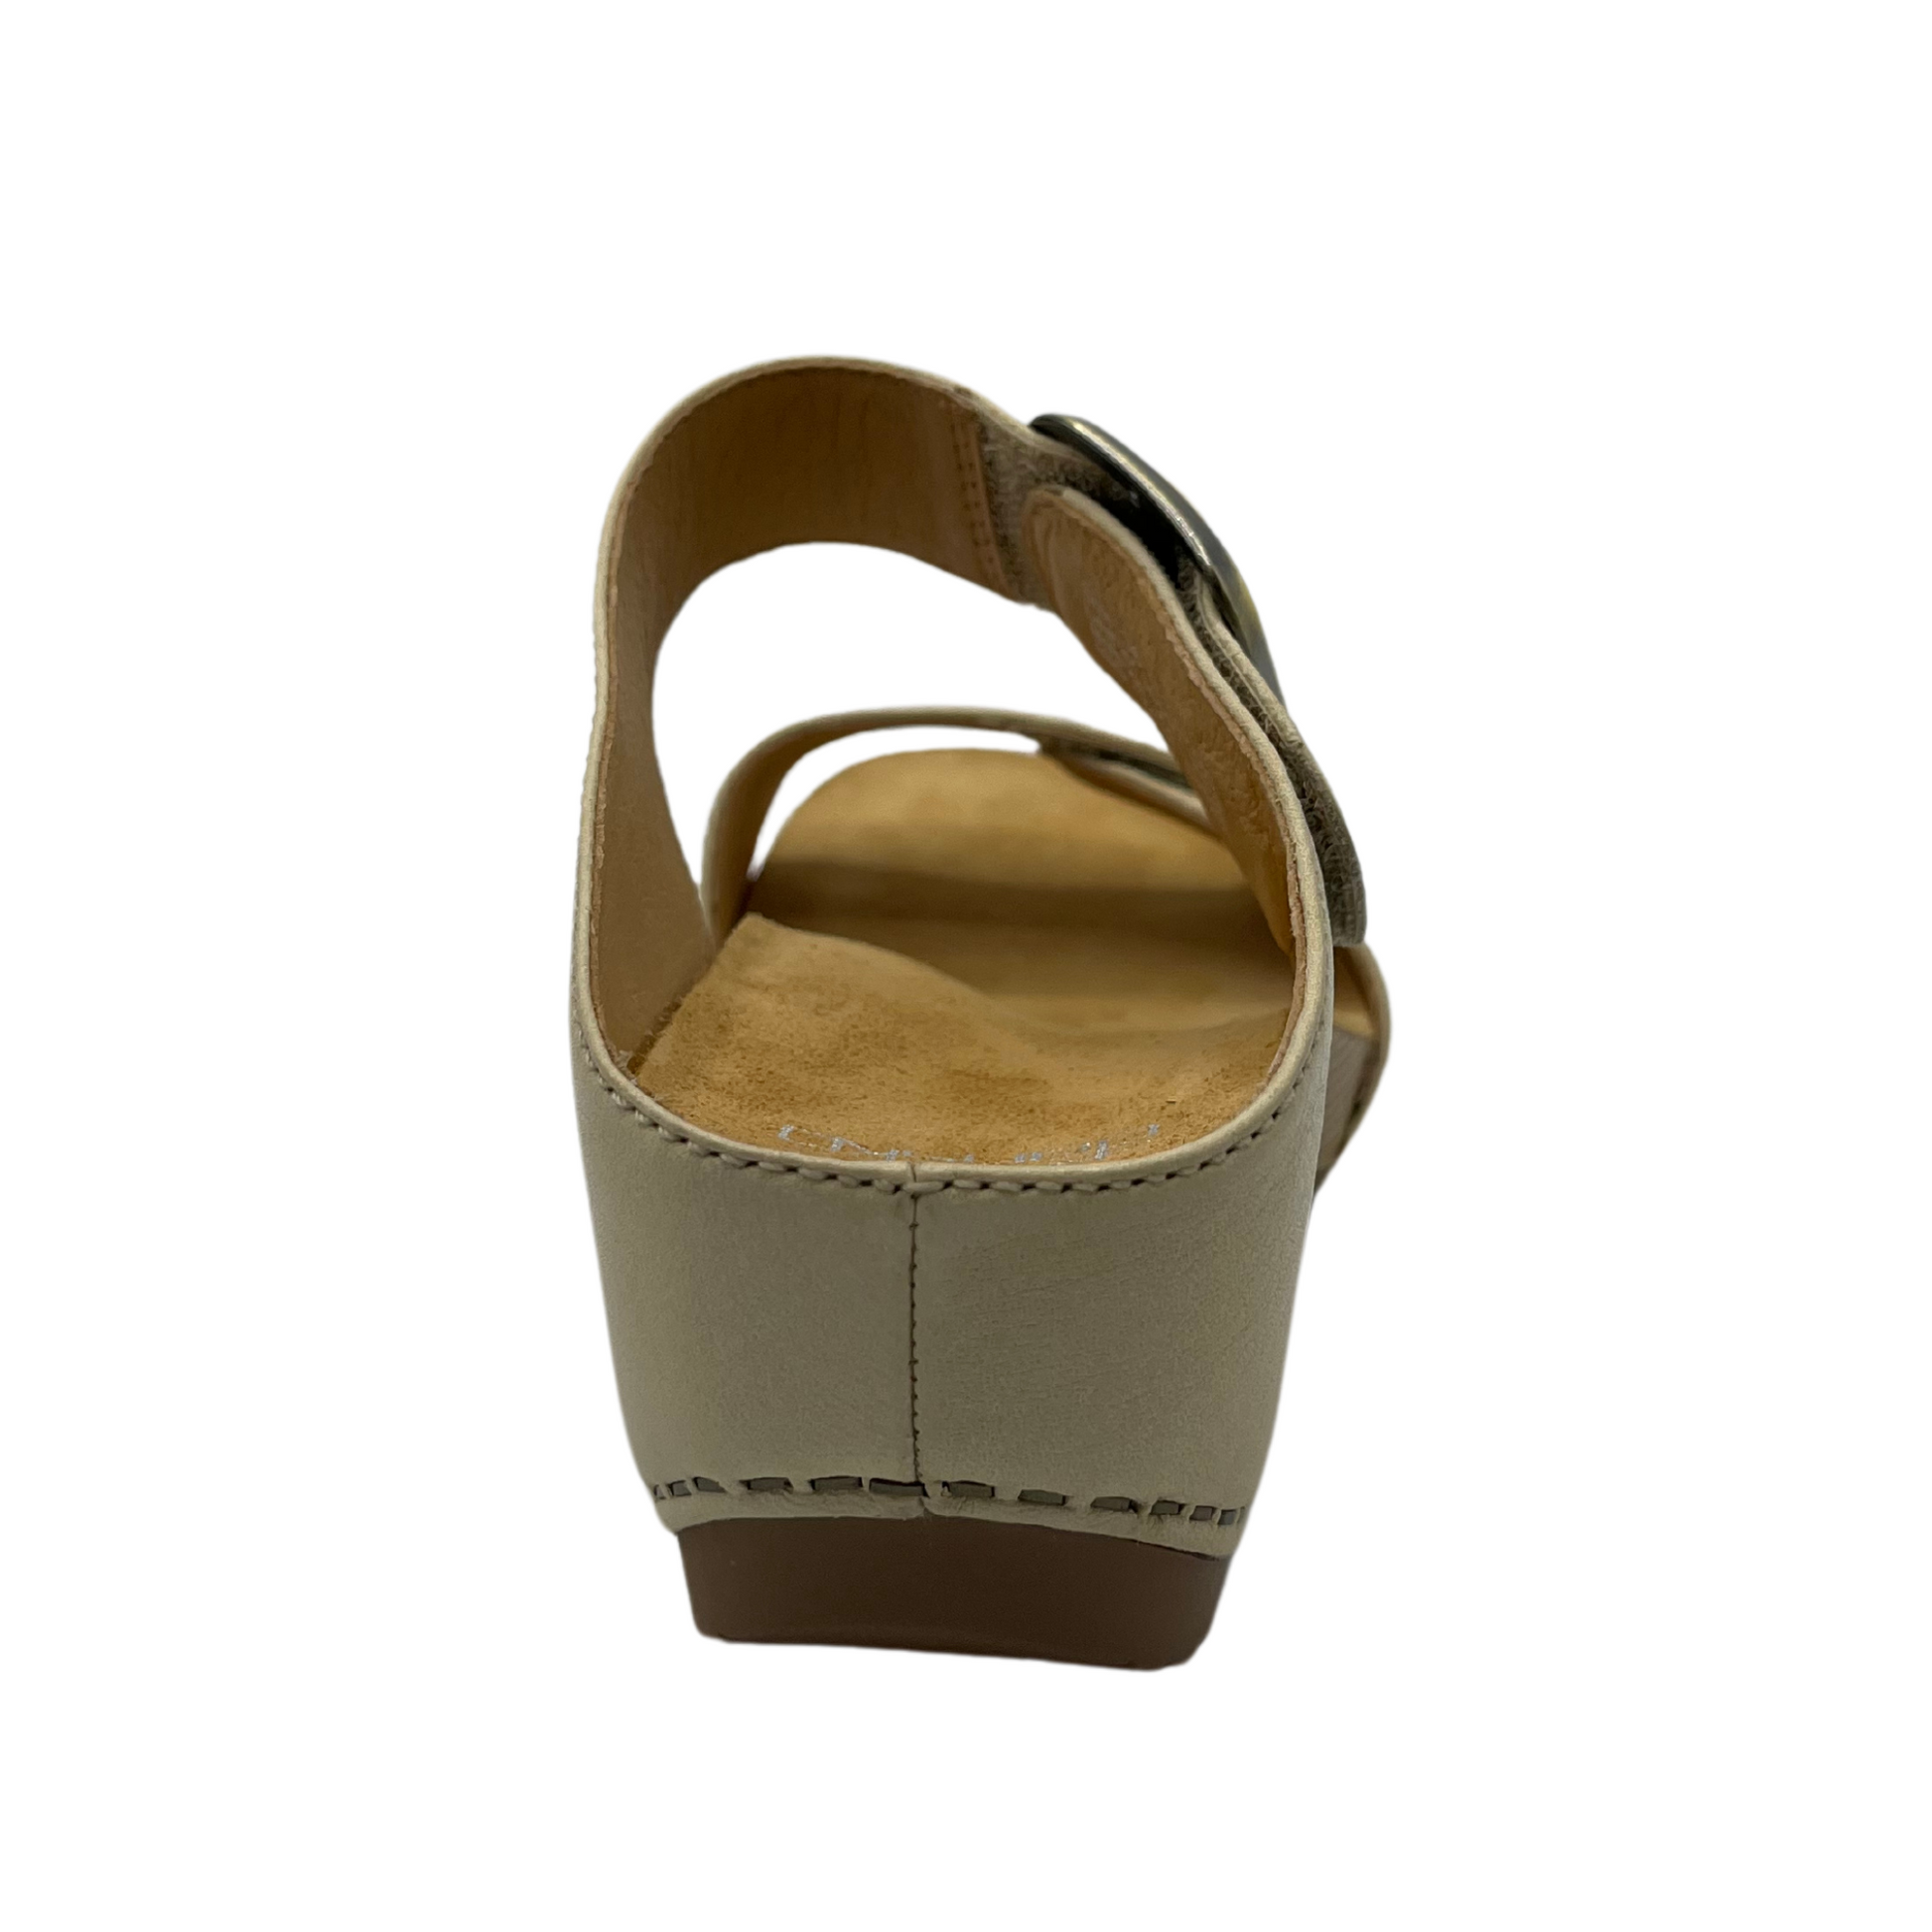 Back view of linen leather sandal with gold buckle strap and chunky heel